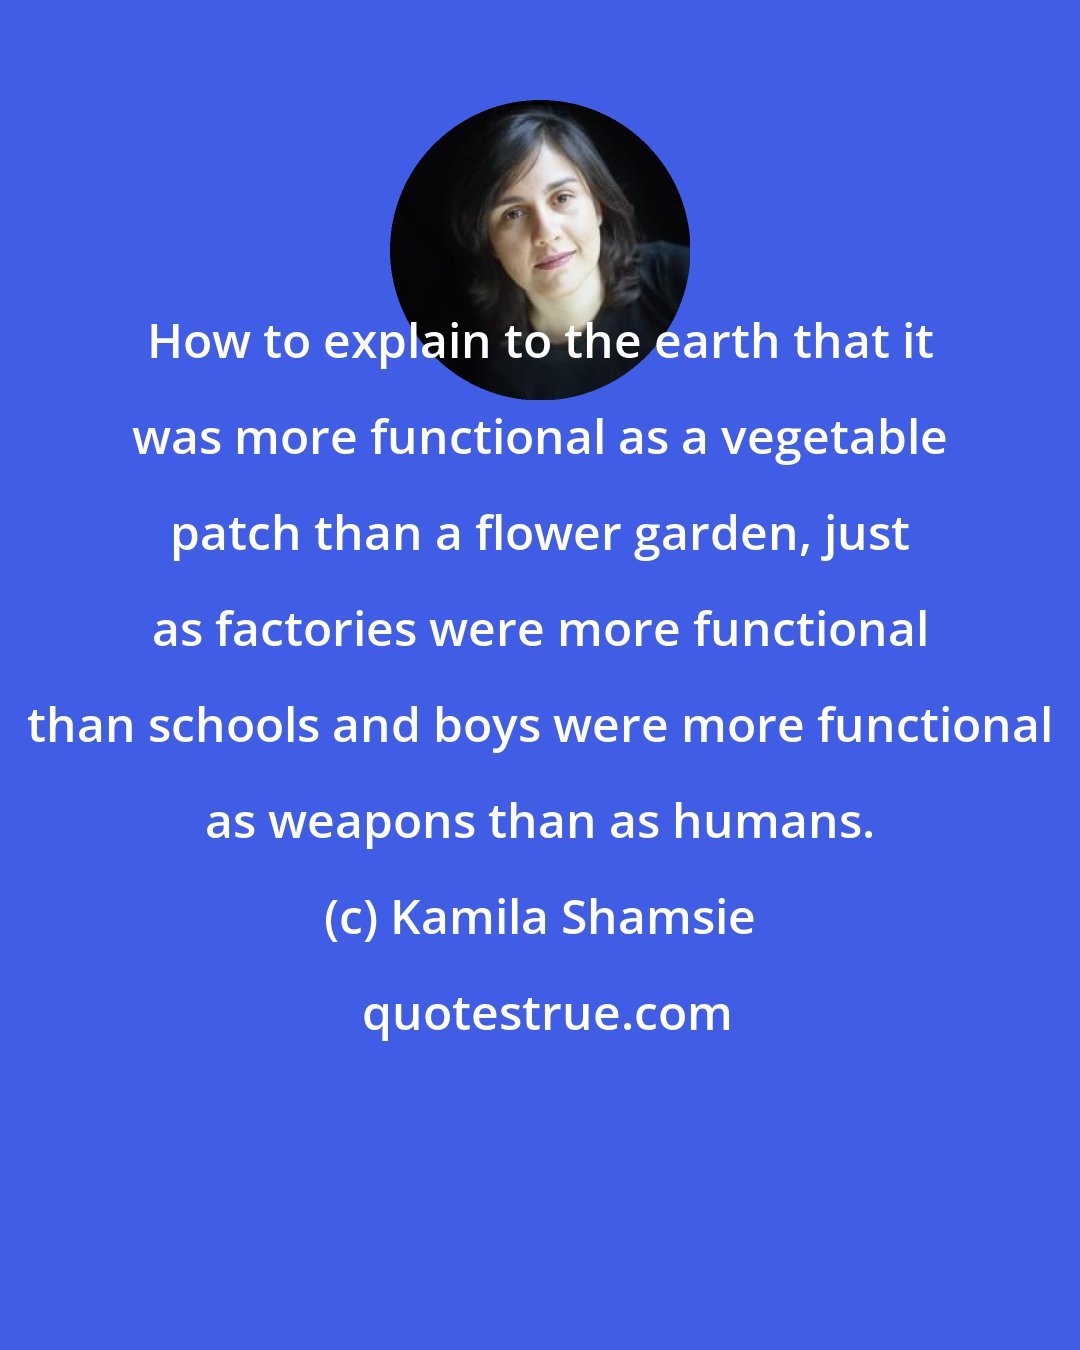 Kamila Shamsie: How to explain to the earth that it was more functional as a vegetable patch than a flower garden, just as factories were more functional than schools and boys were more functional as weapons than as humans.